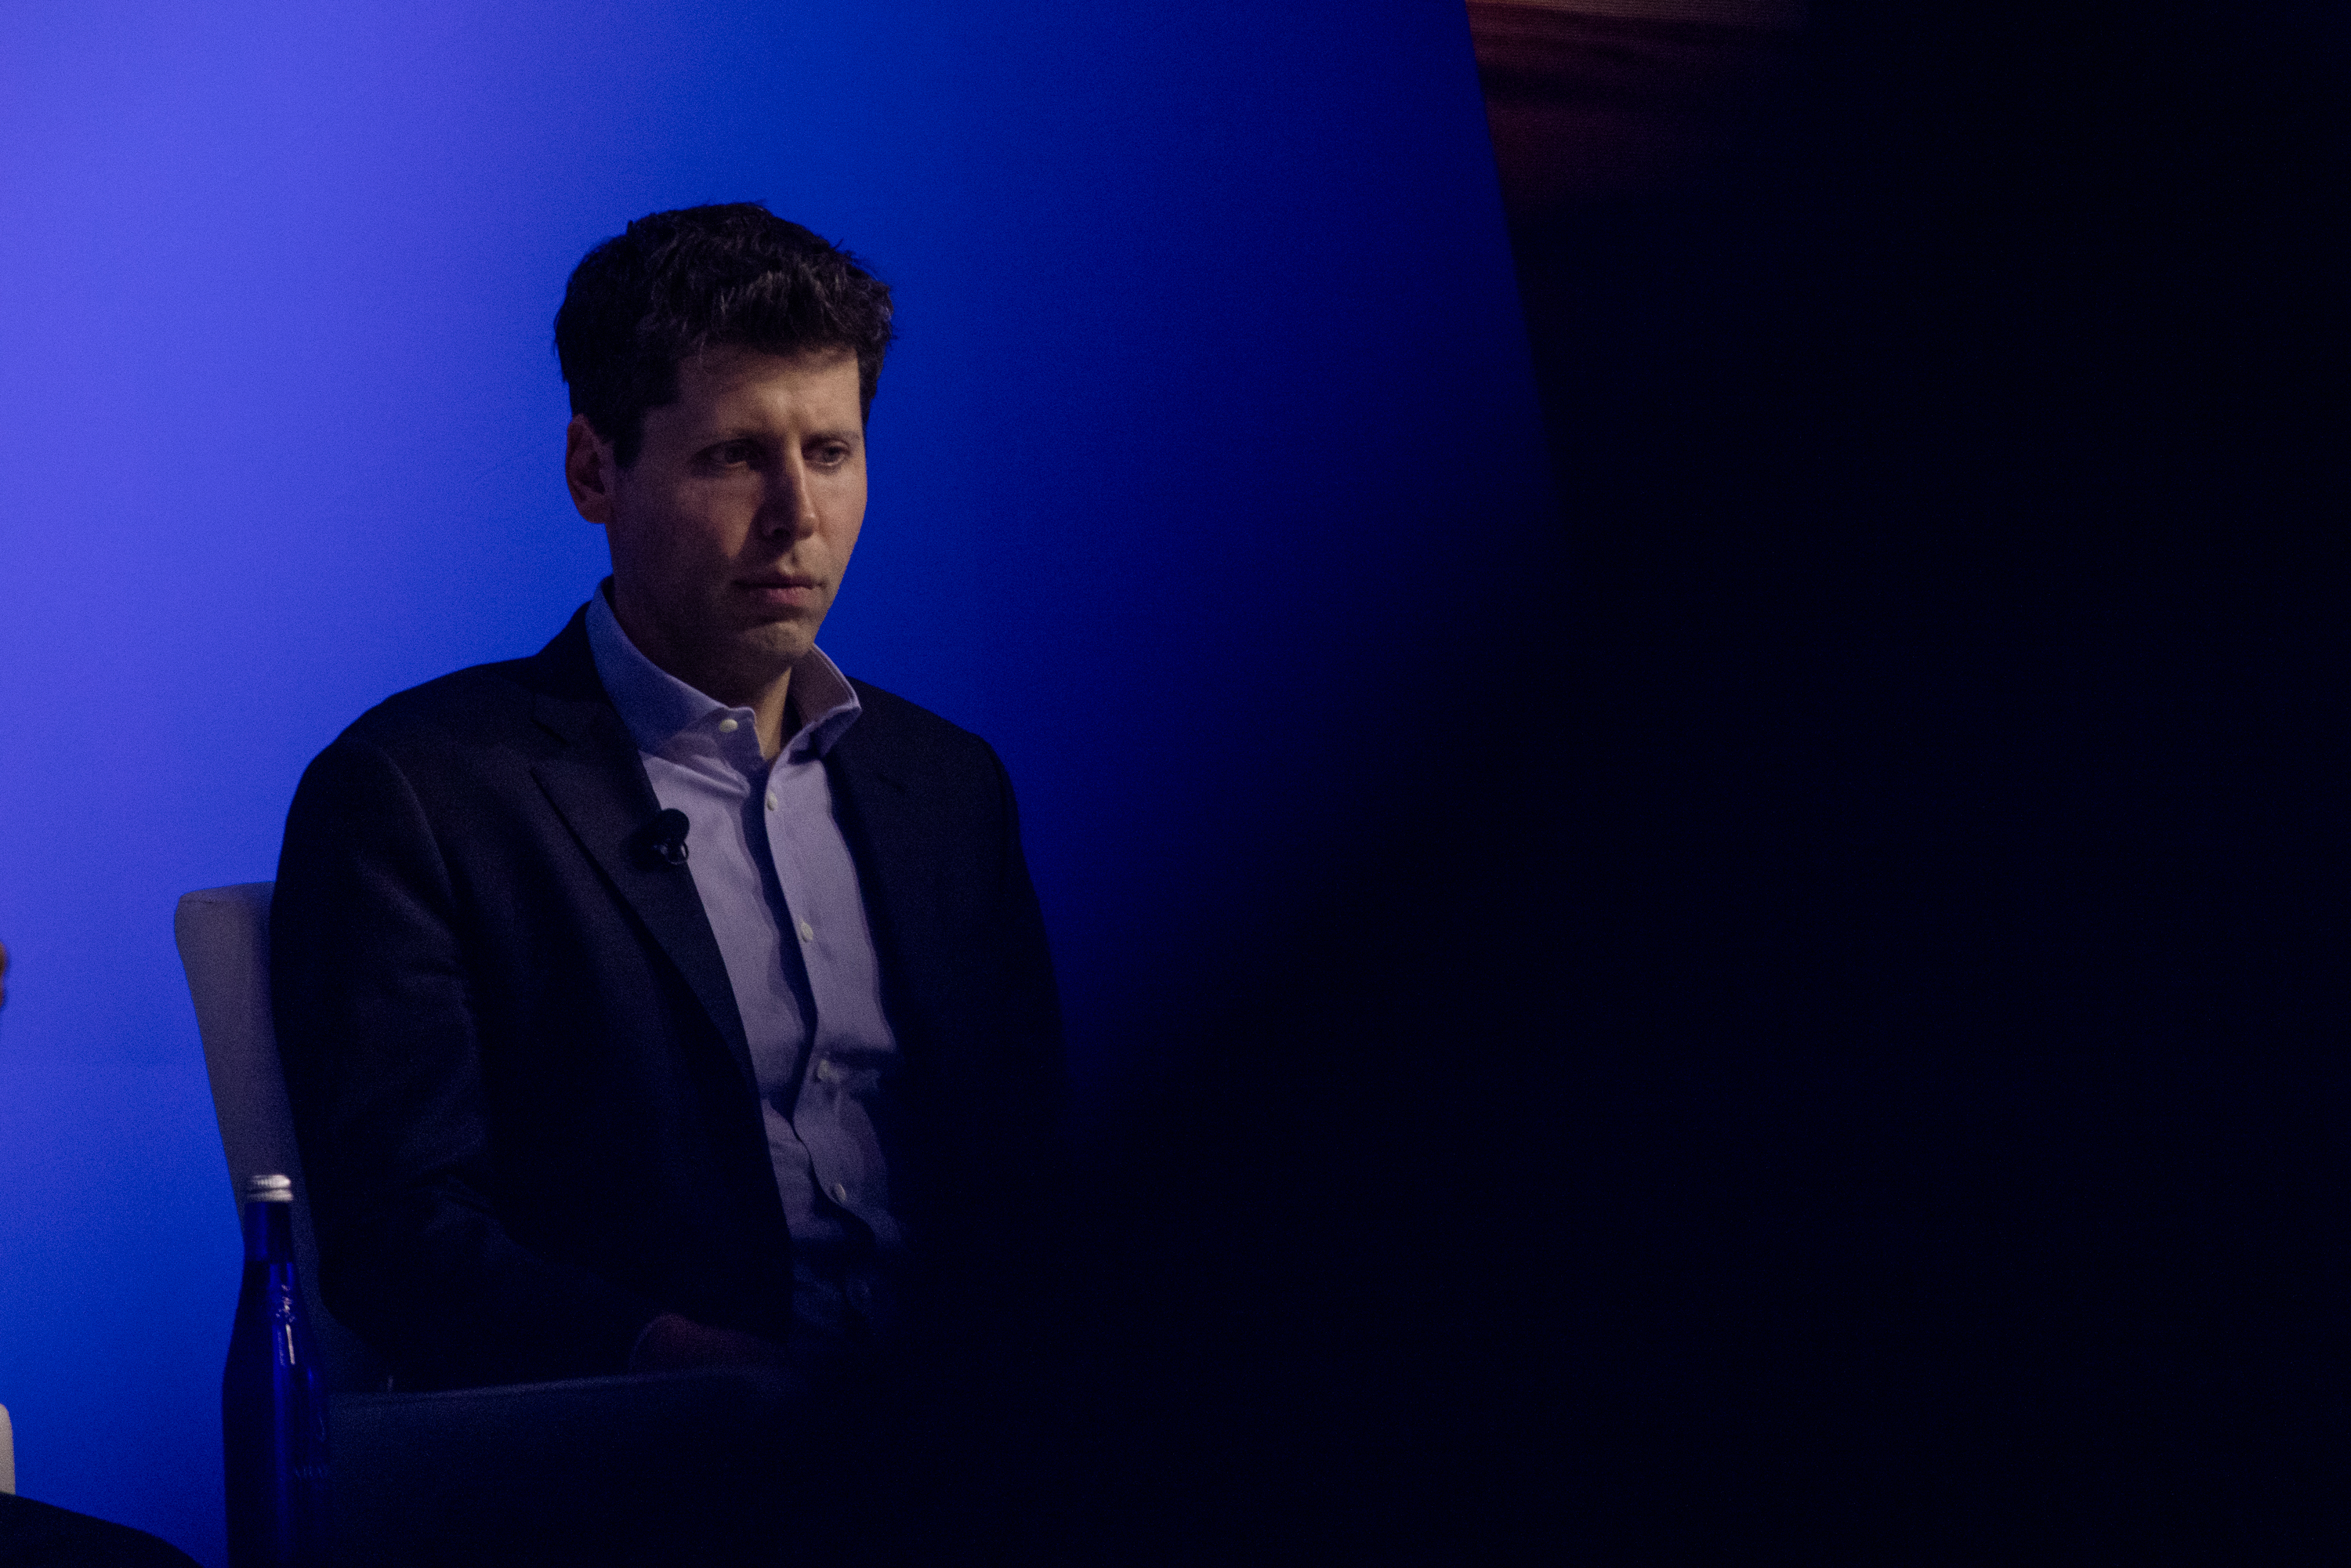 Sam Altman, CEO of OpenAI, looks offscreen with a blue background.